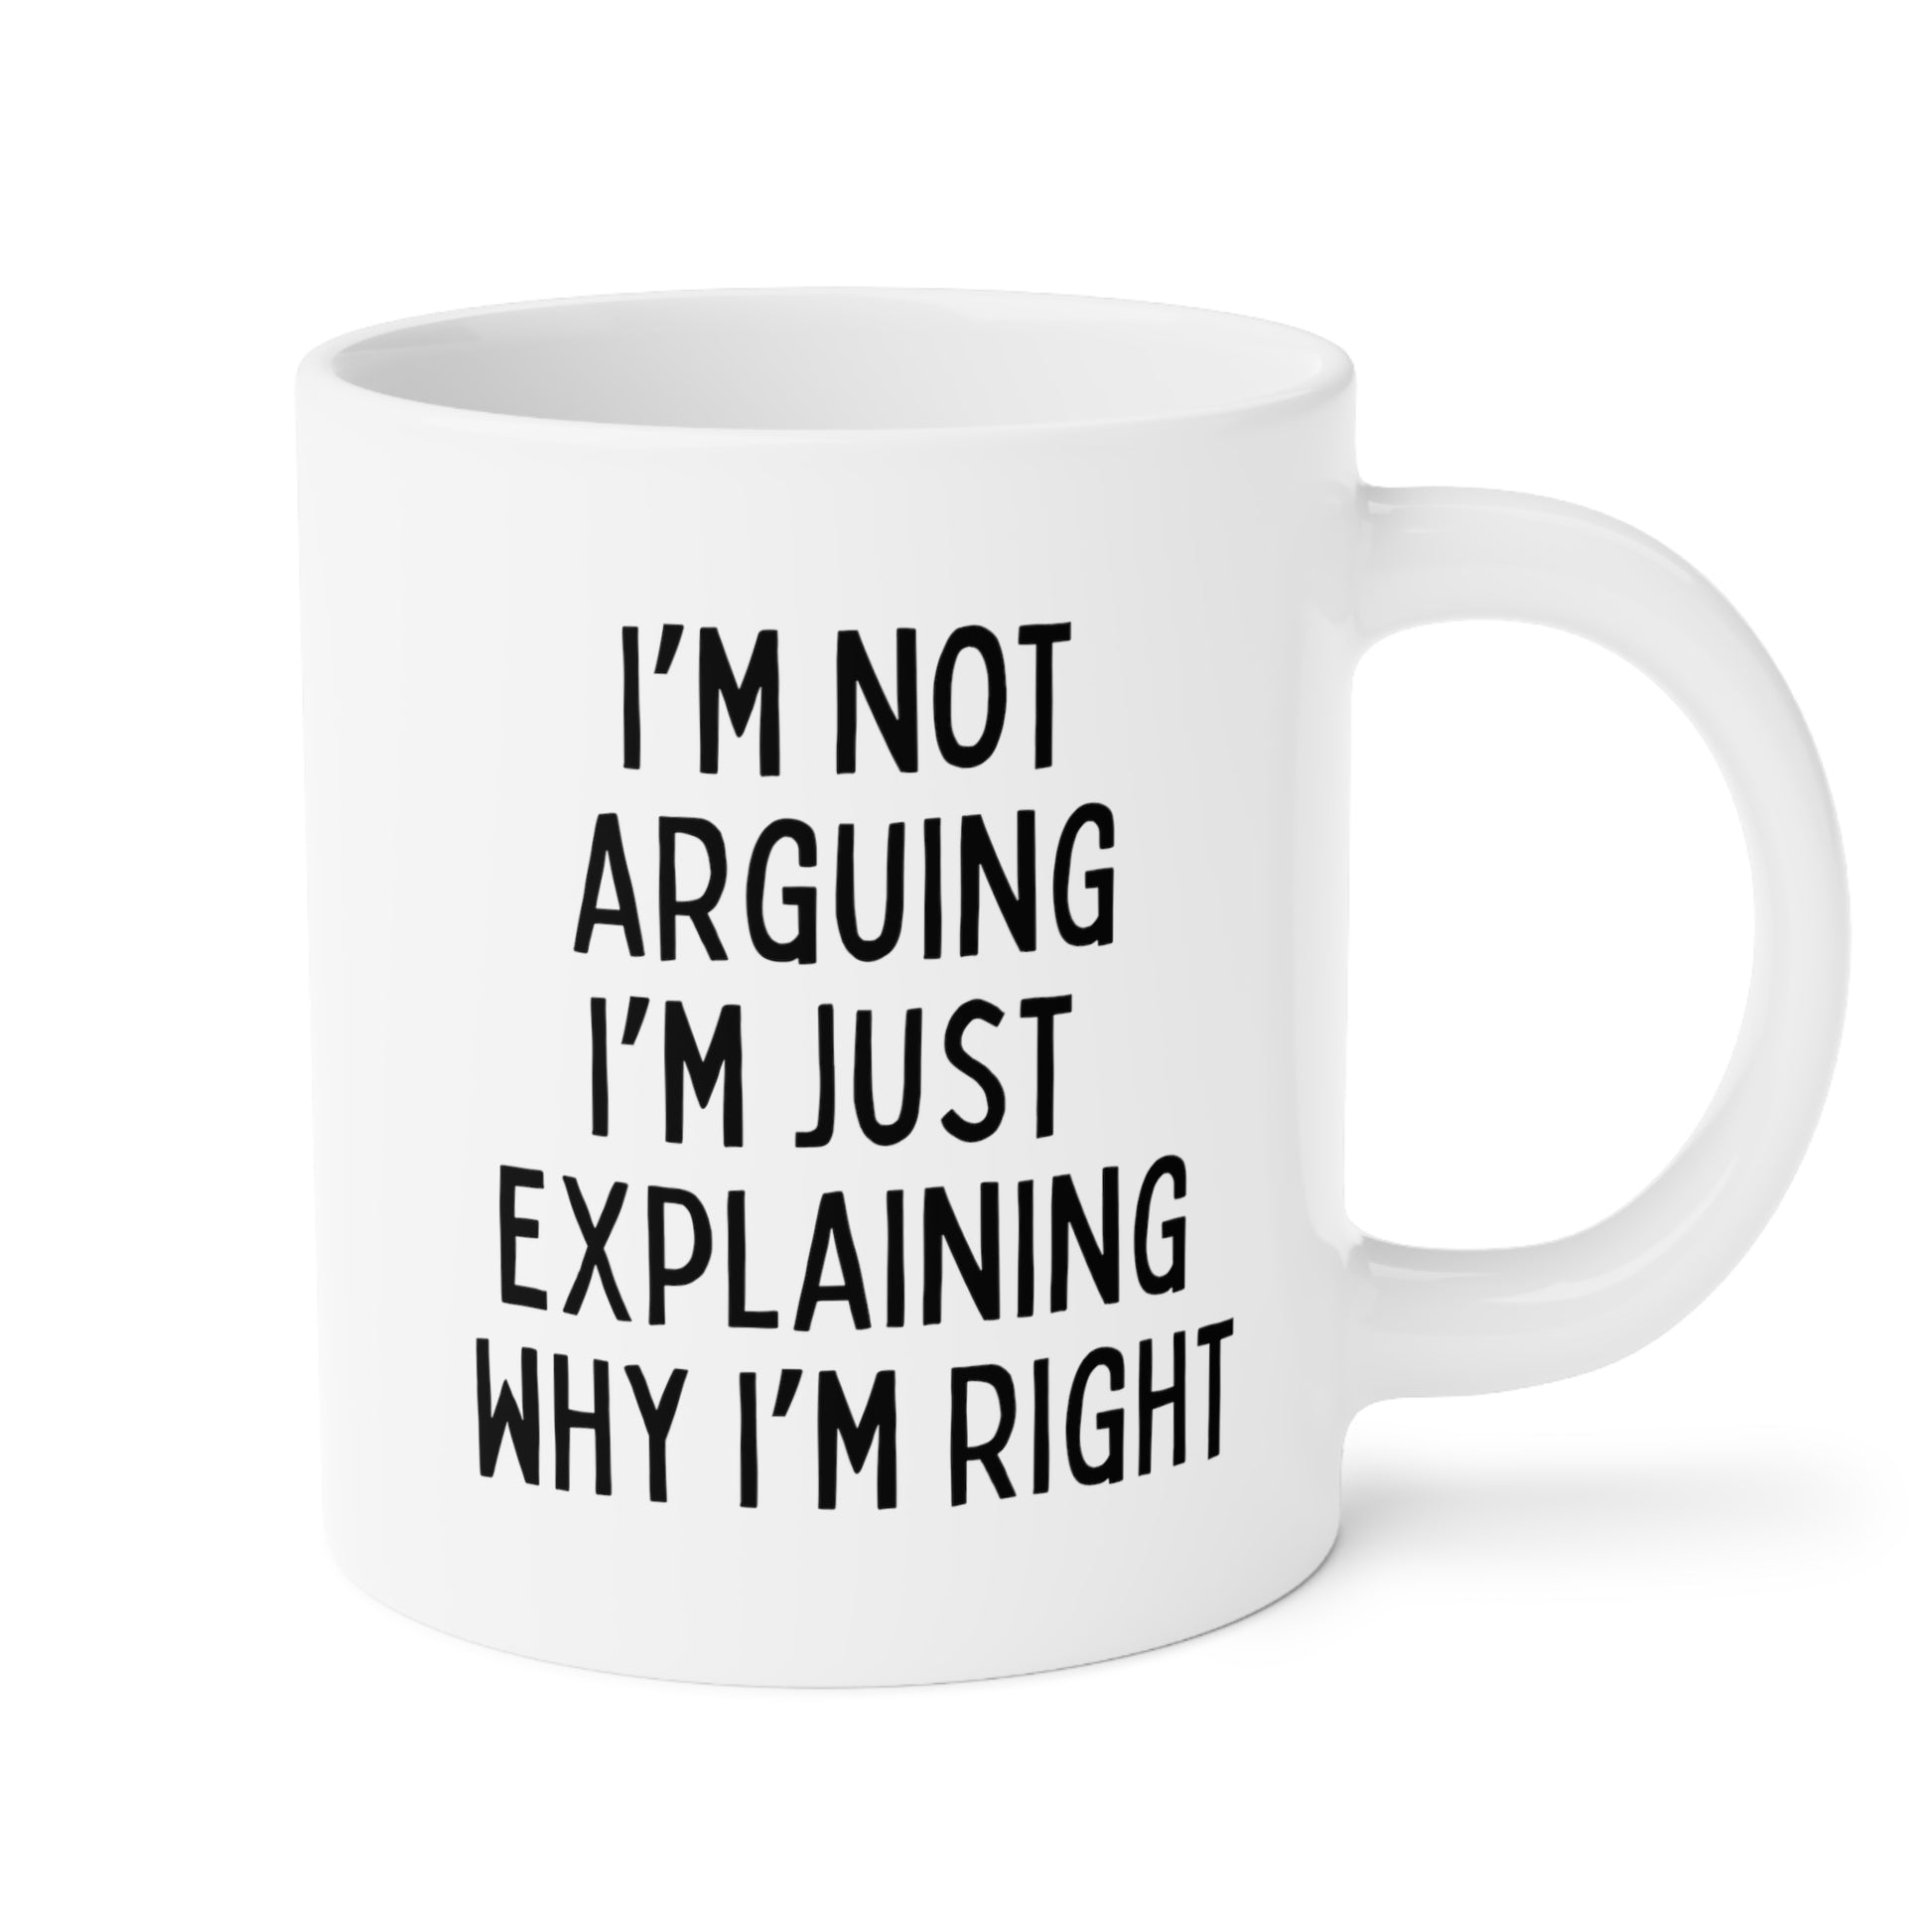 I'm Not Arguing I'm Just Explaining Why I'm Right 20oz white funny large coffee mug gift for birthday christmas sarcastic sassy snarky tea cup waveywares wavey wares wavywares wavy wares